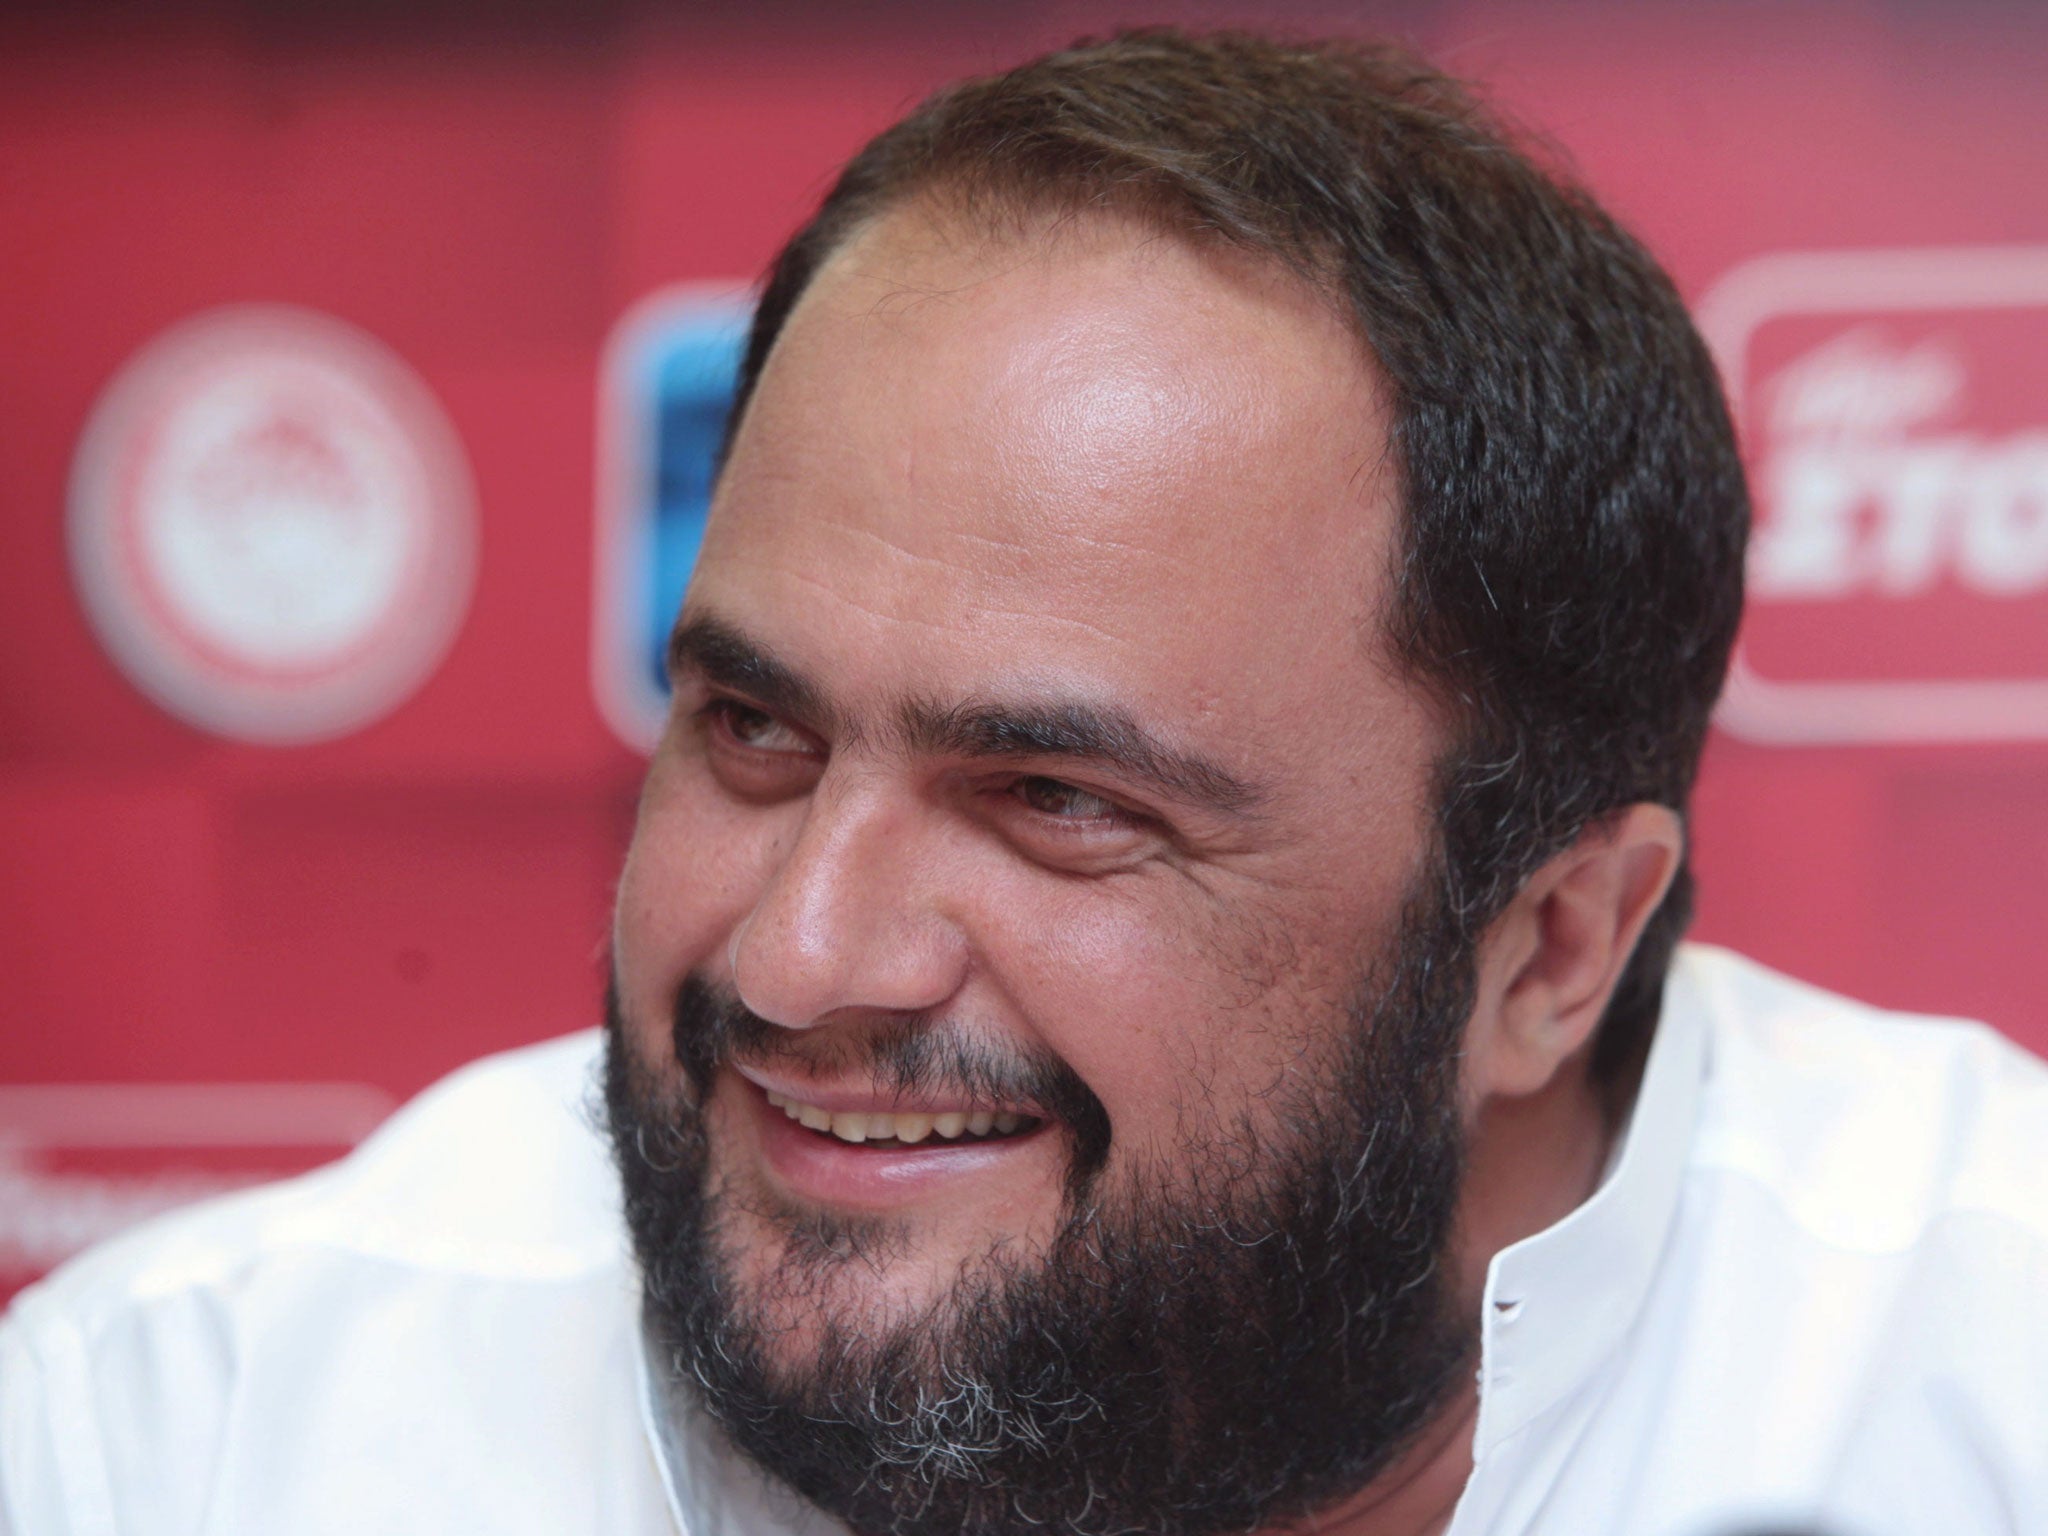 Buy British: Evangelos Marinakis is looking for his next investment